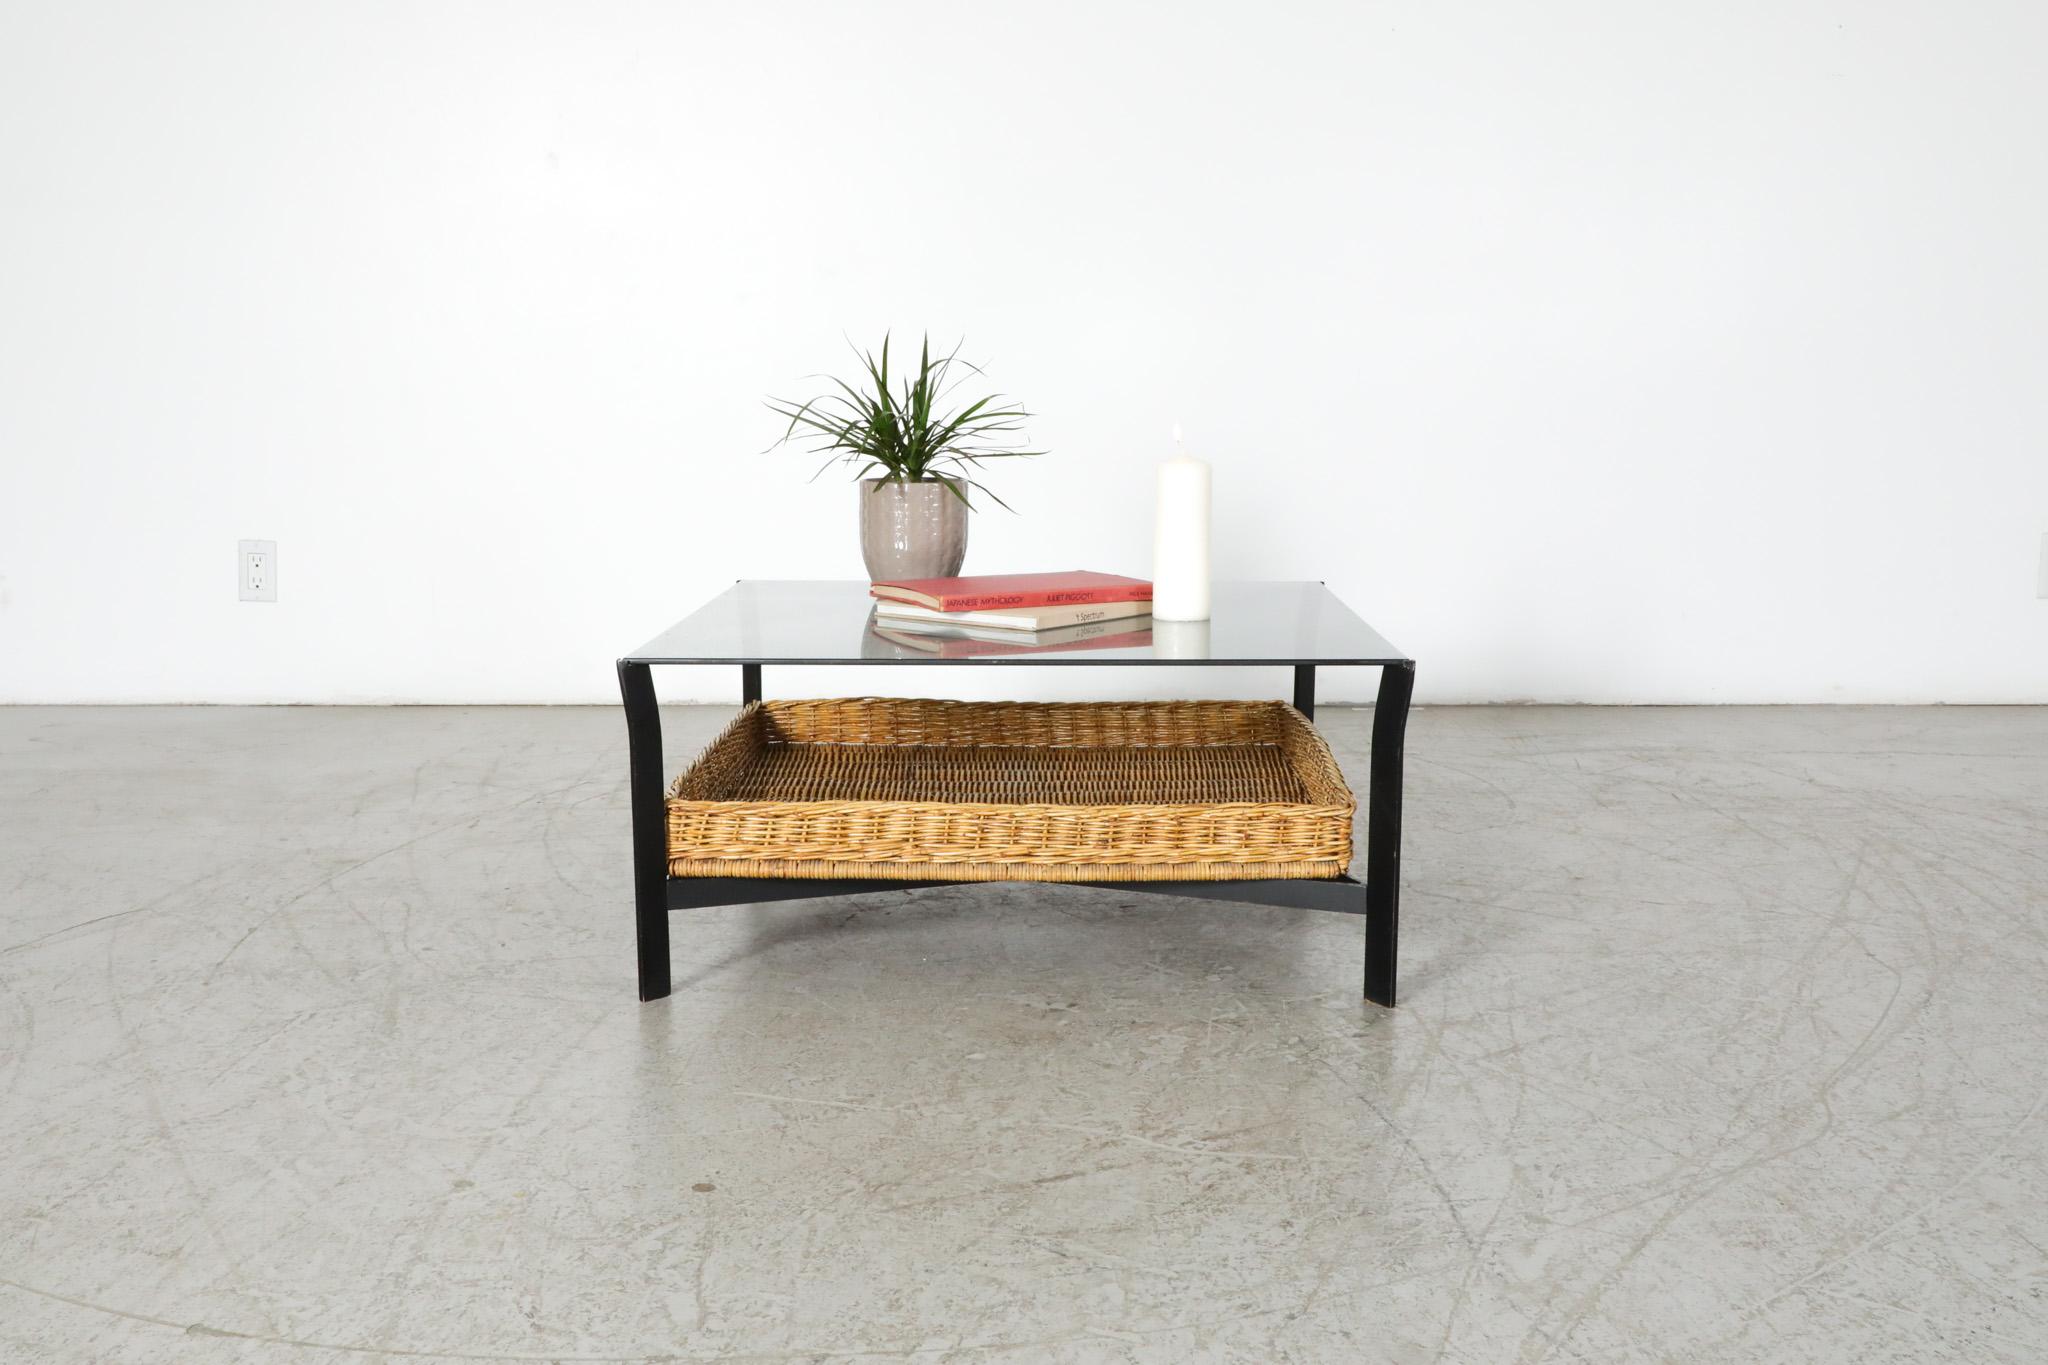 Mid-Century, 1960's, black enameled metal coffee table with lower rattan basket, designed by Dutch post-war design great Rudolf Wolff for Rohe Noordwolde. A handsomely designed square metal frame paired with a dark smoked glass top and woven rattan